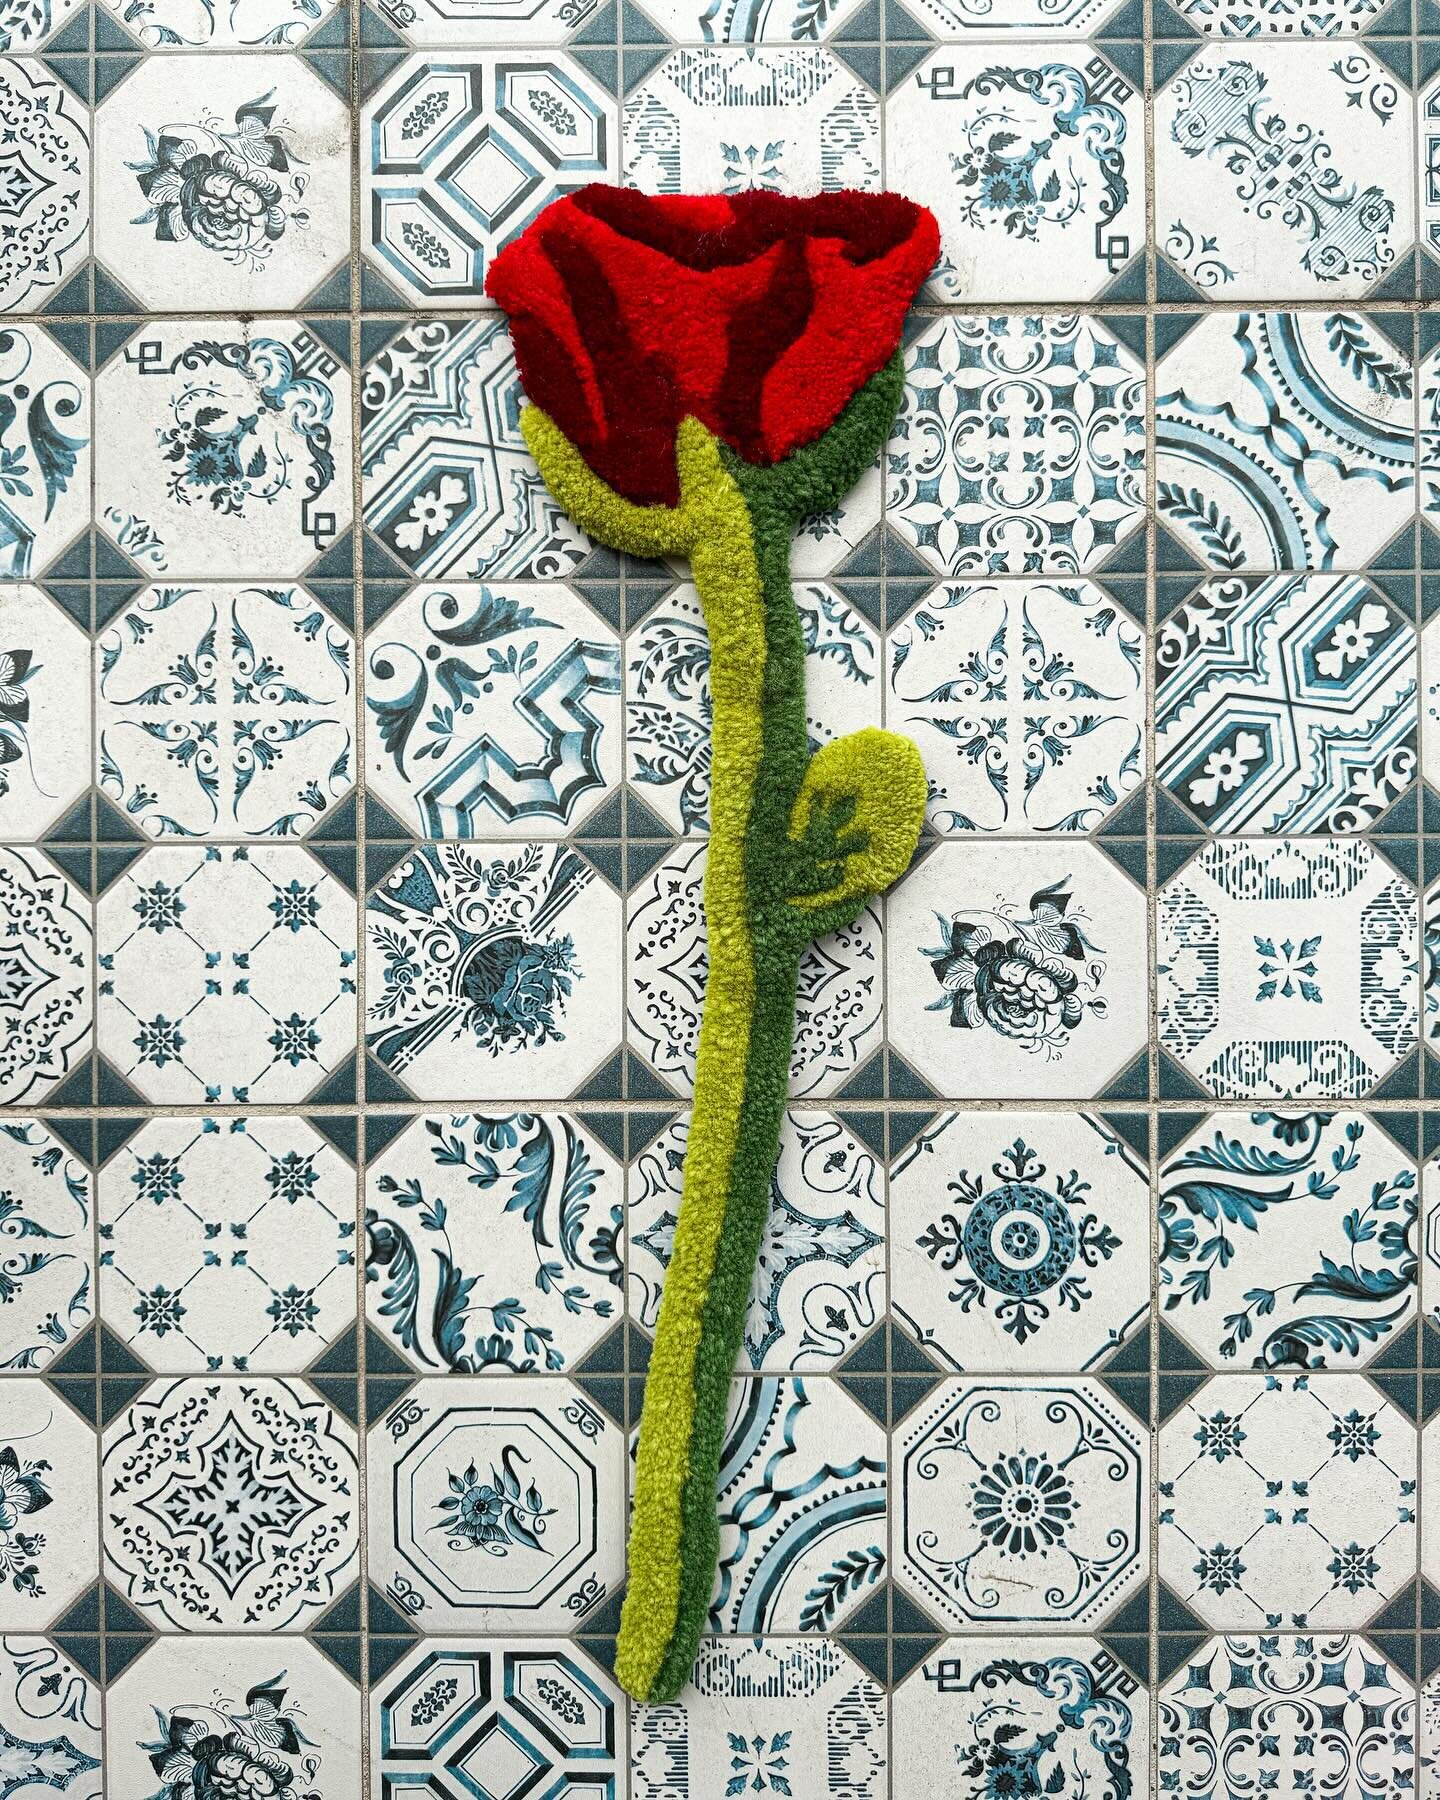 happy valentine&rsquo;s day lovers 🌹
sending allll my love to you cheeky little buggas always ❤️&zwj;🔥🫀

this rose is one of 2 originals that i made for an exclusive LIVE stream competition I did on TikTok last year! whoever won got the other rose